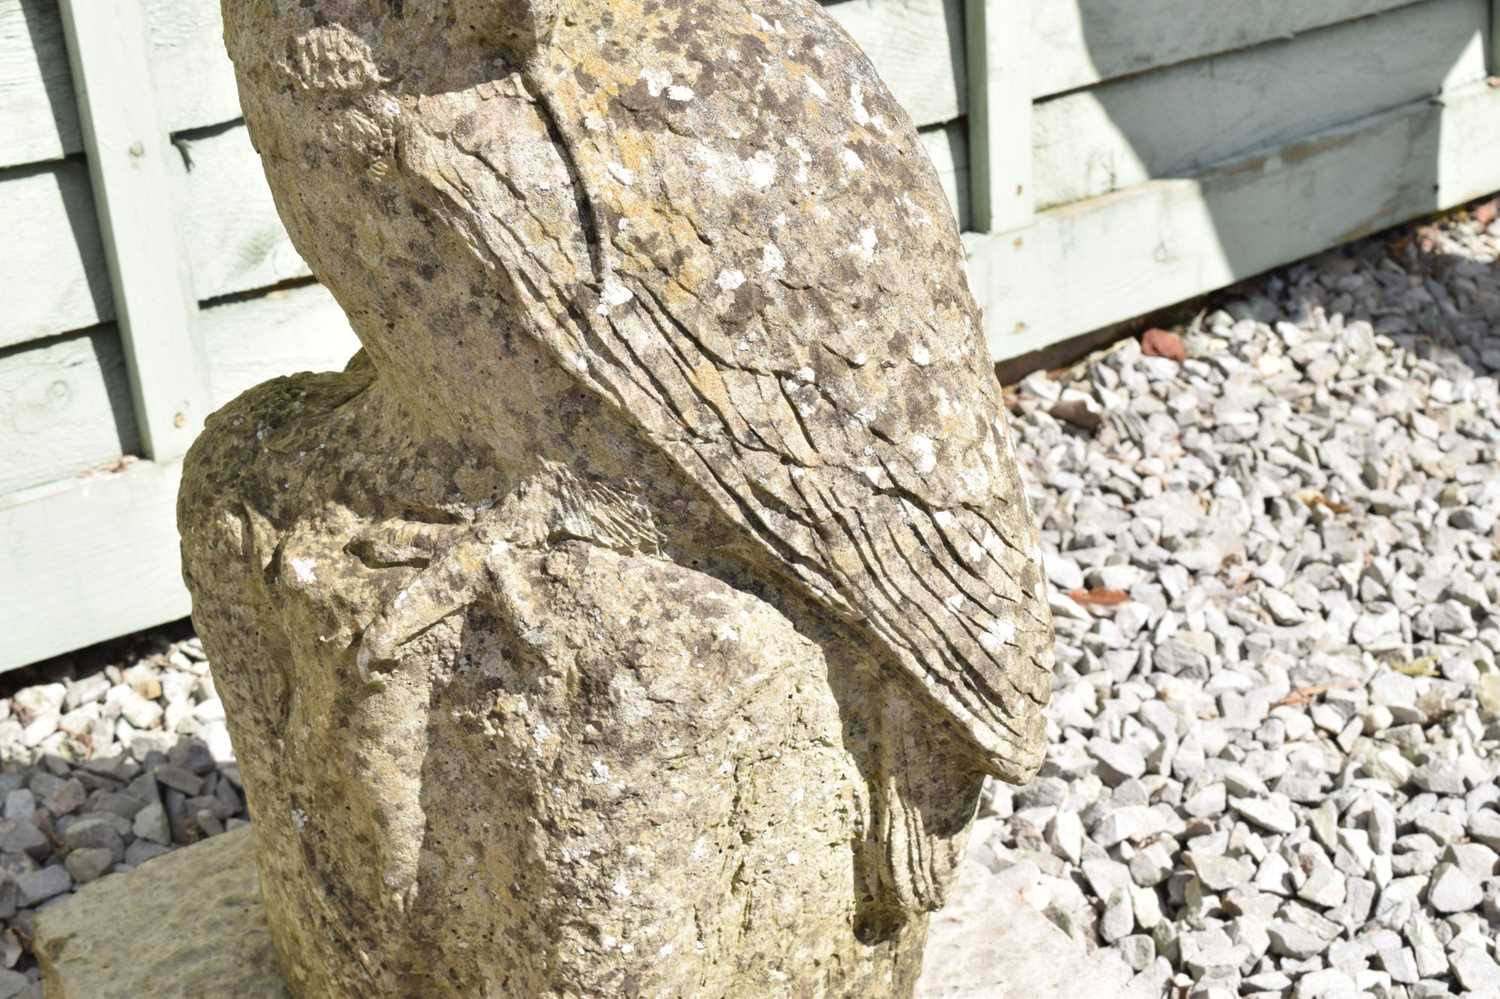 Composition stone garden ornament of a perched owl - Image 4 of 4